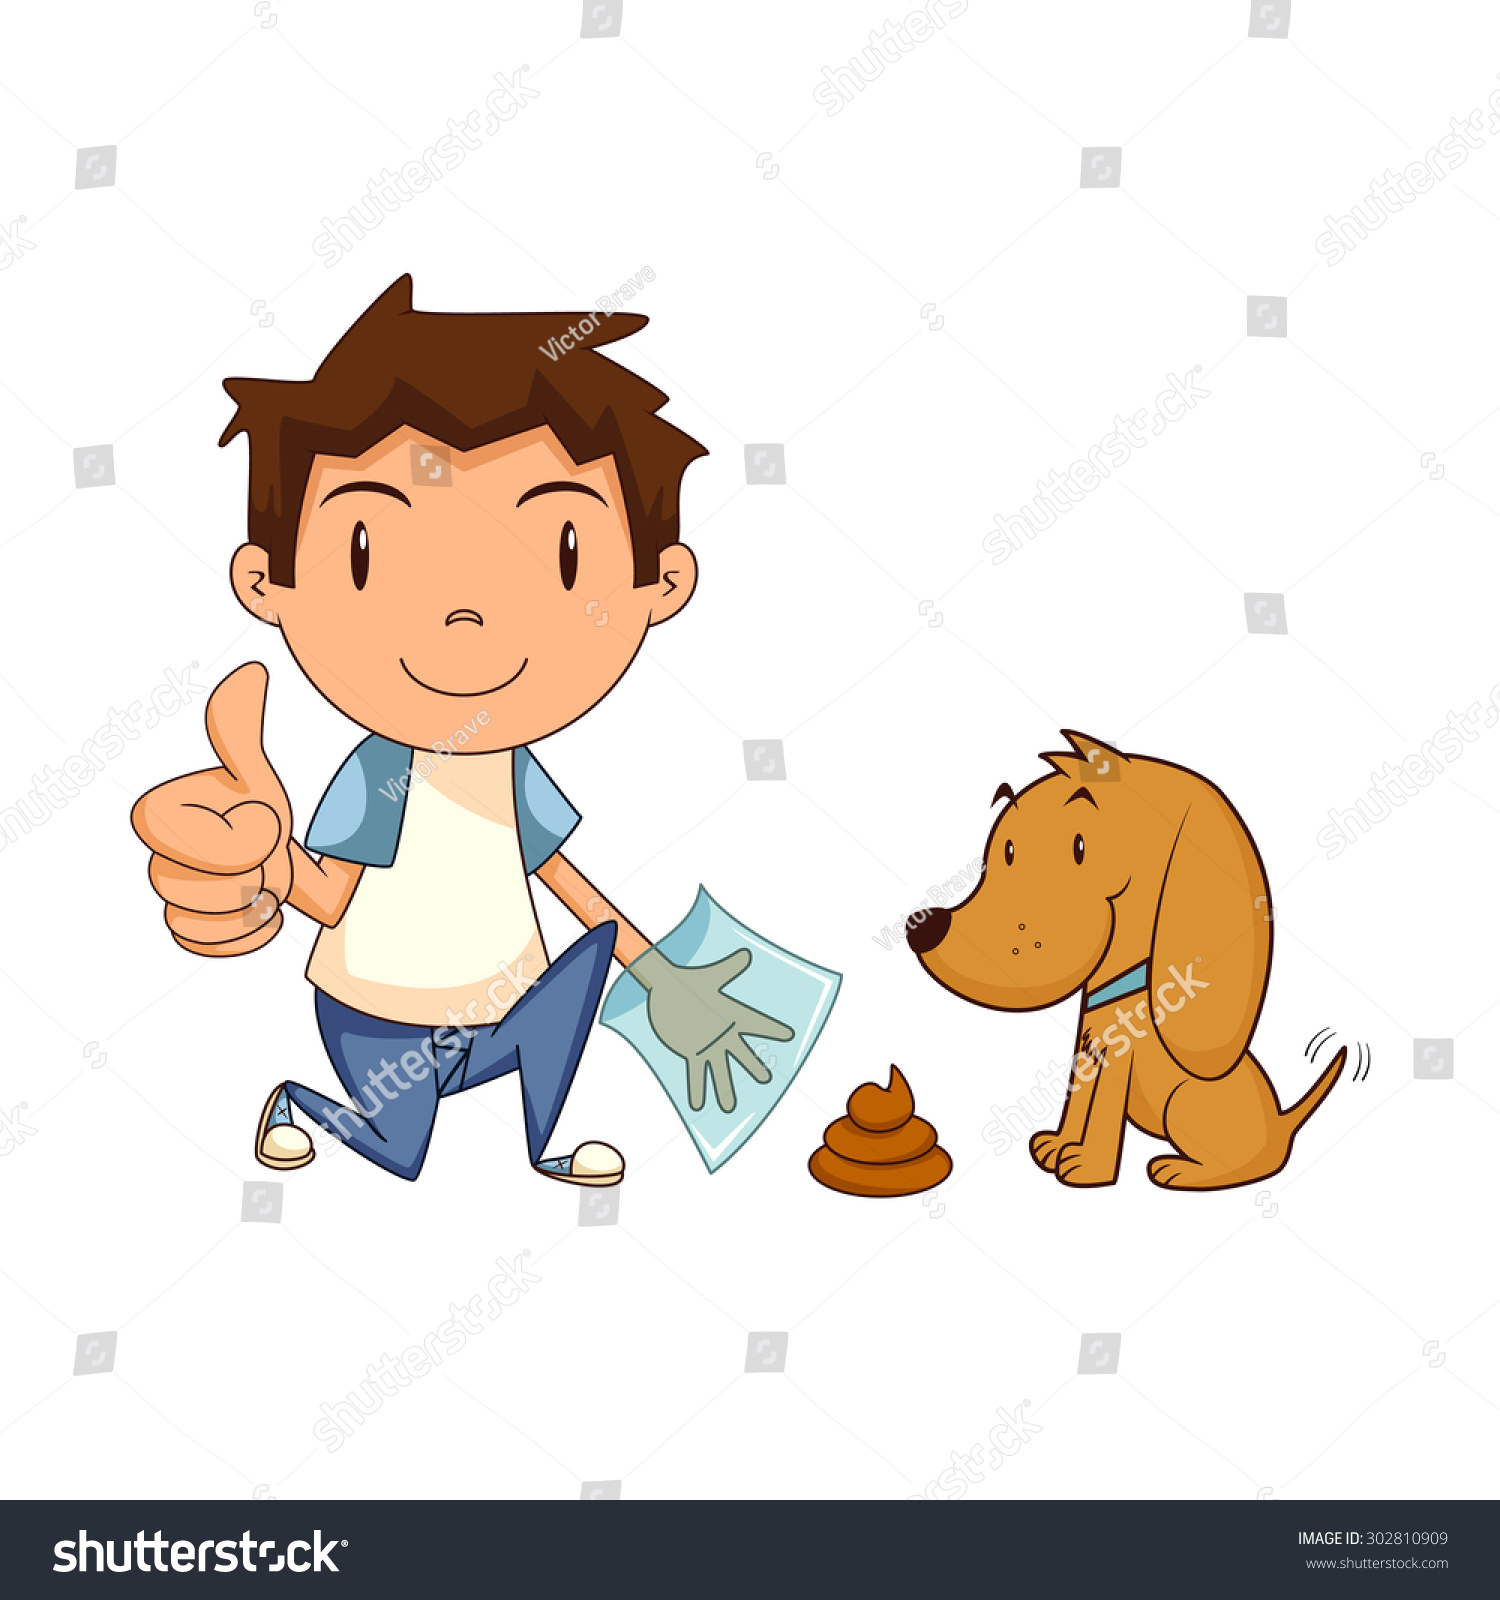 clipart of picking up dog poop - photo #22